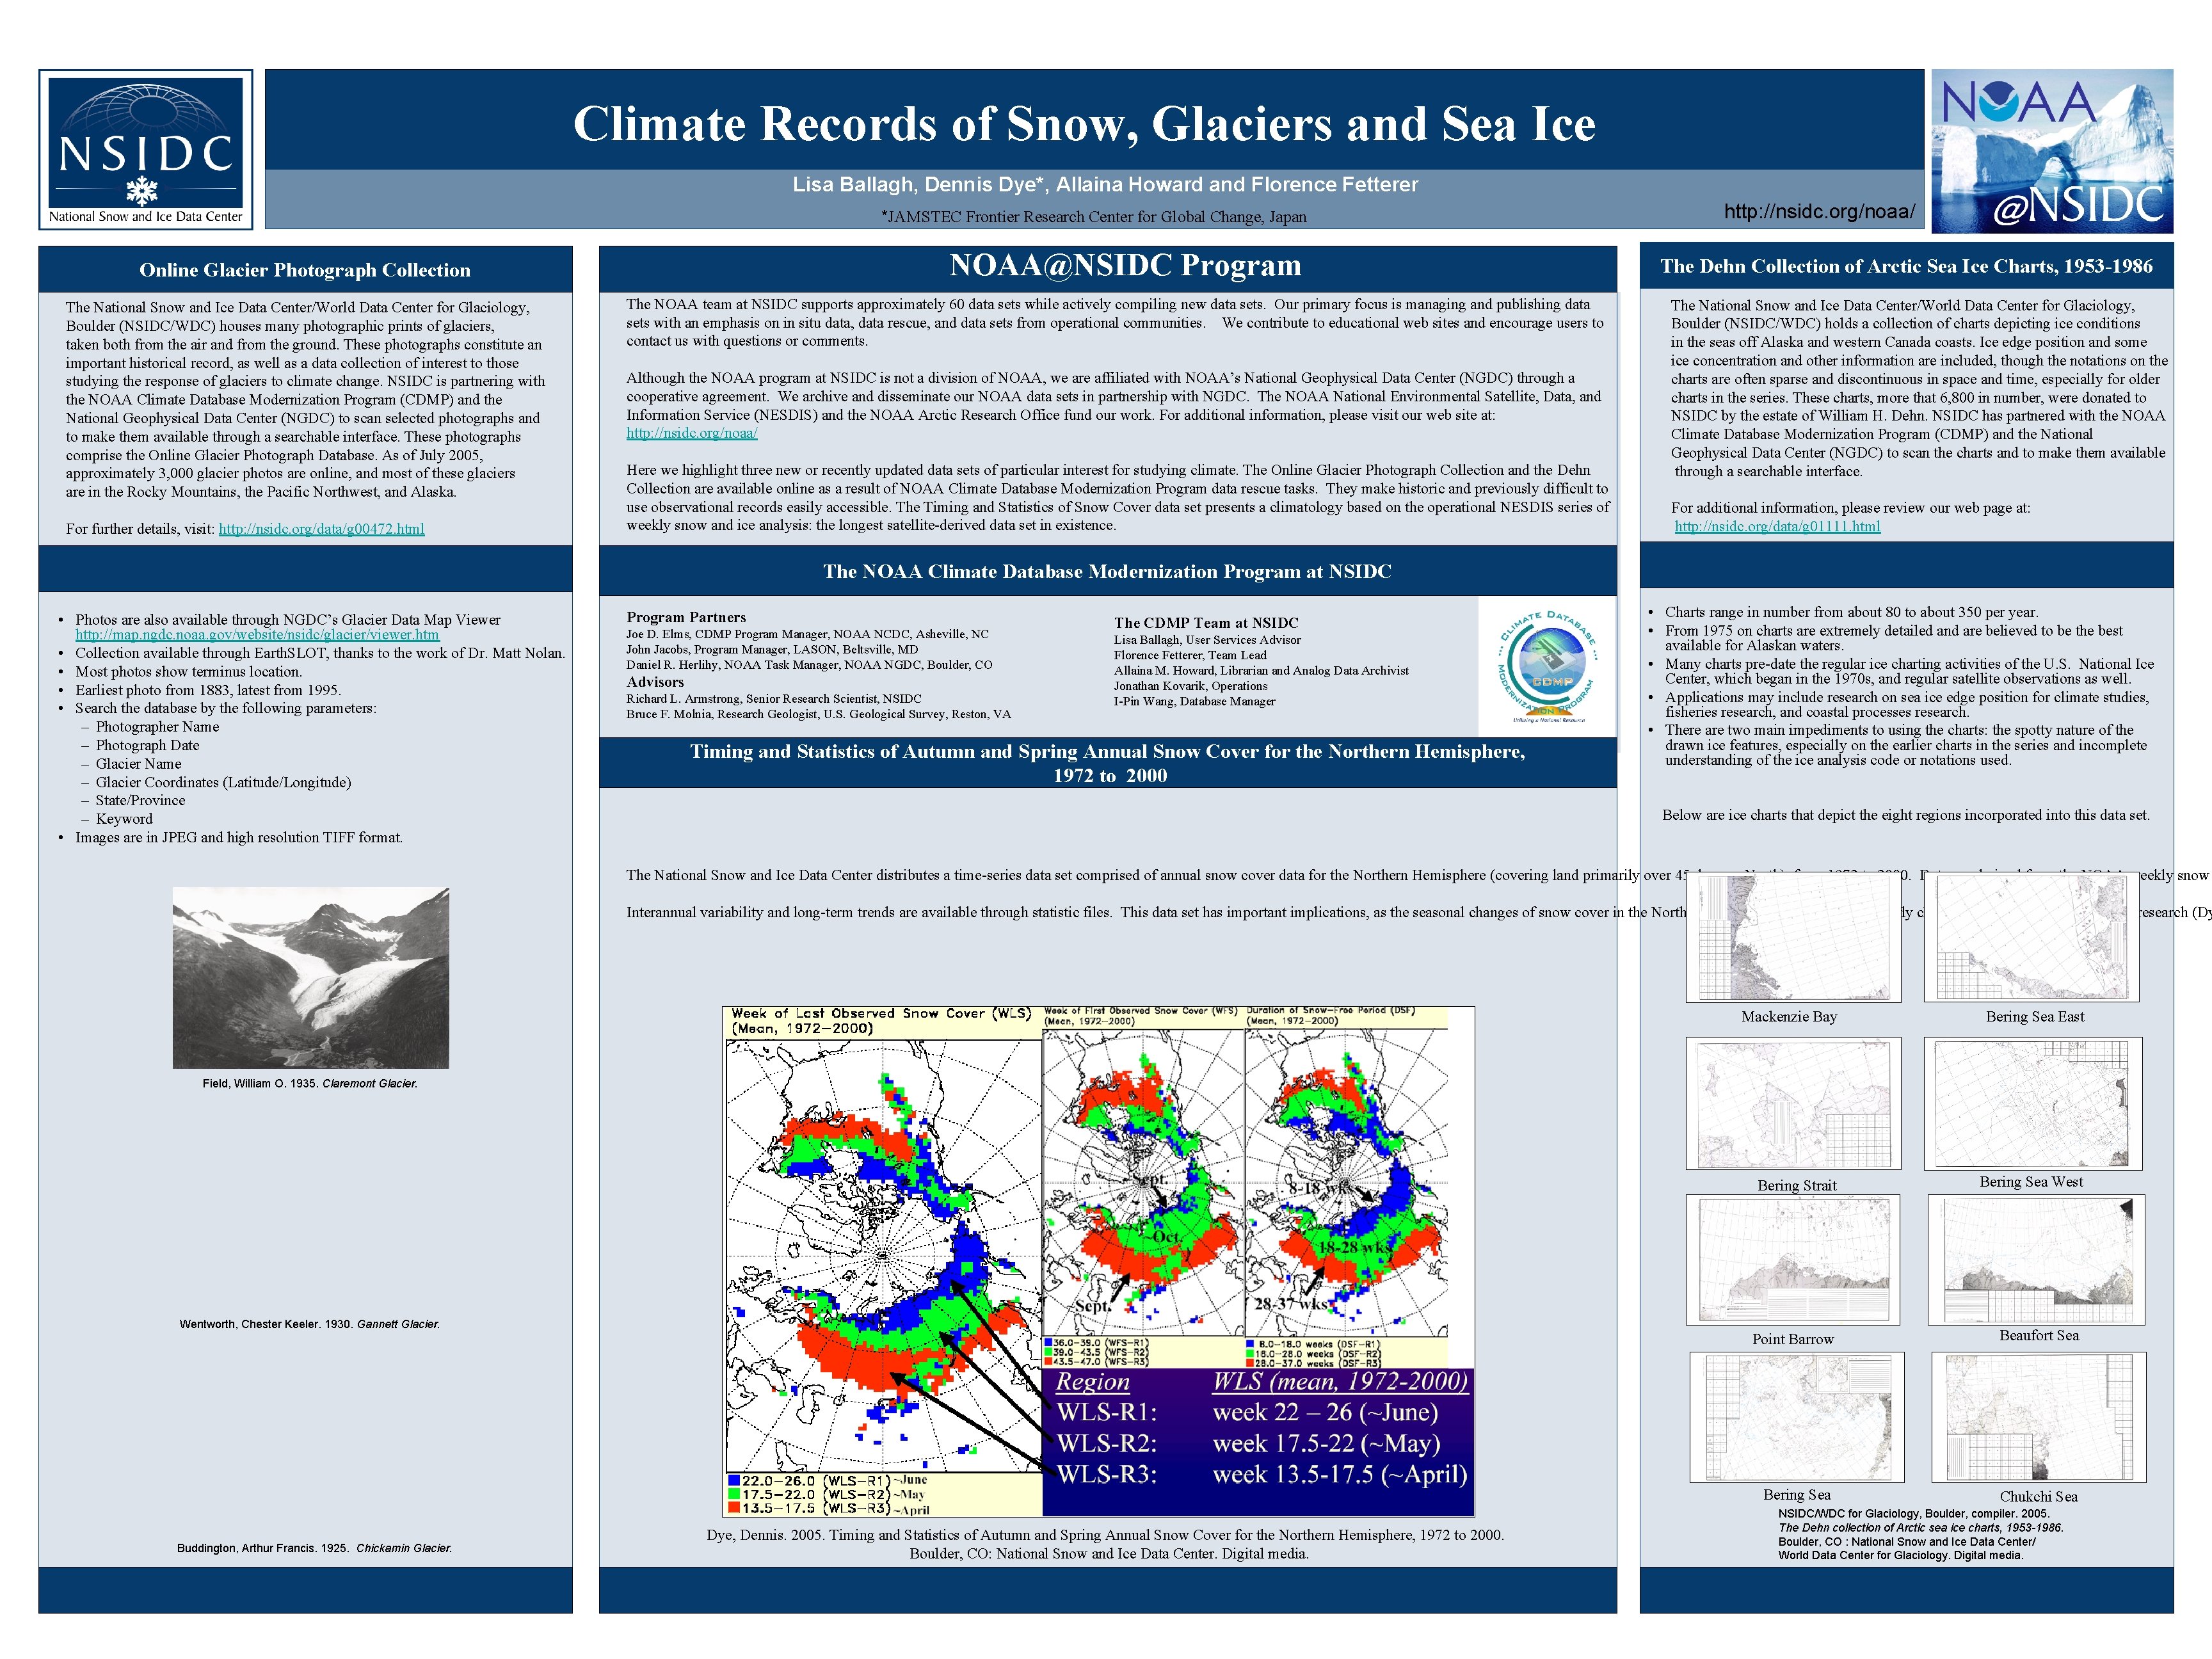 Climate Records of Snow, Glaciers and Sea Ice Lisa Ballagh, Dennis Dye*, Allaina Howard